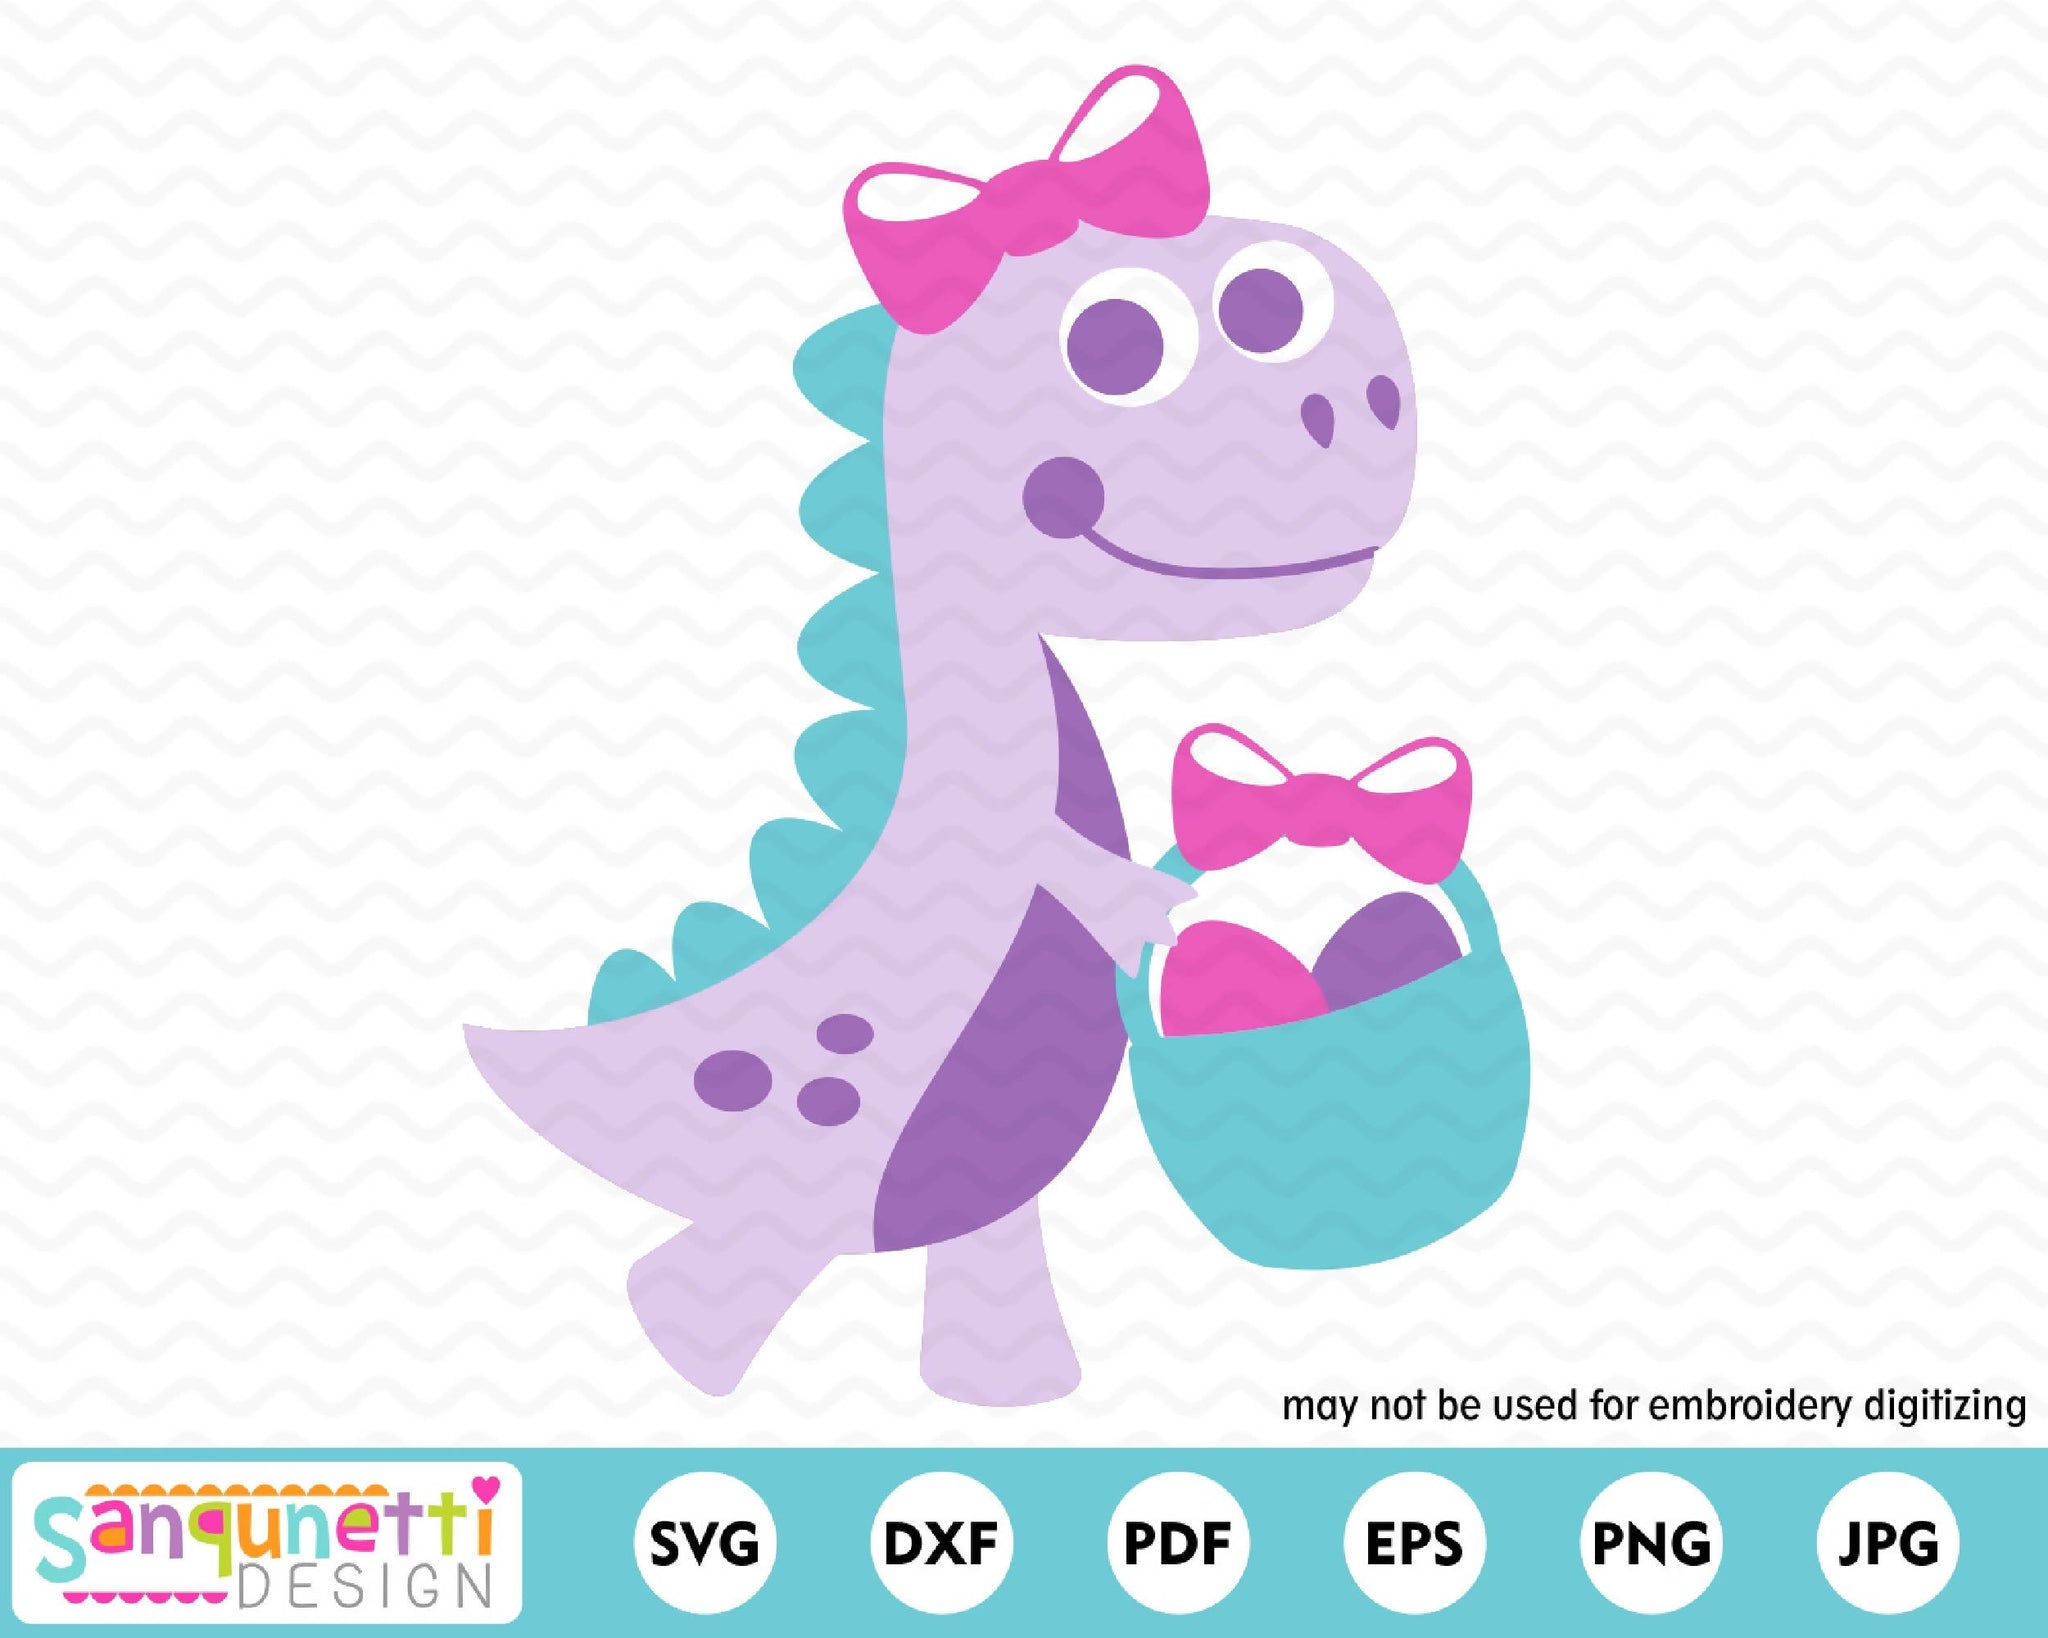 Download Easter Dinosaur Svg Png Jpg Dxf Dinosaur Girl Easter Svg Happy Easter Svg Easter Svg For Girls Silhouette Cricut Dinosaur Svg T Rex Svg Clip Art Art Collectibles Tomtherapy Co Il